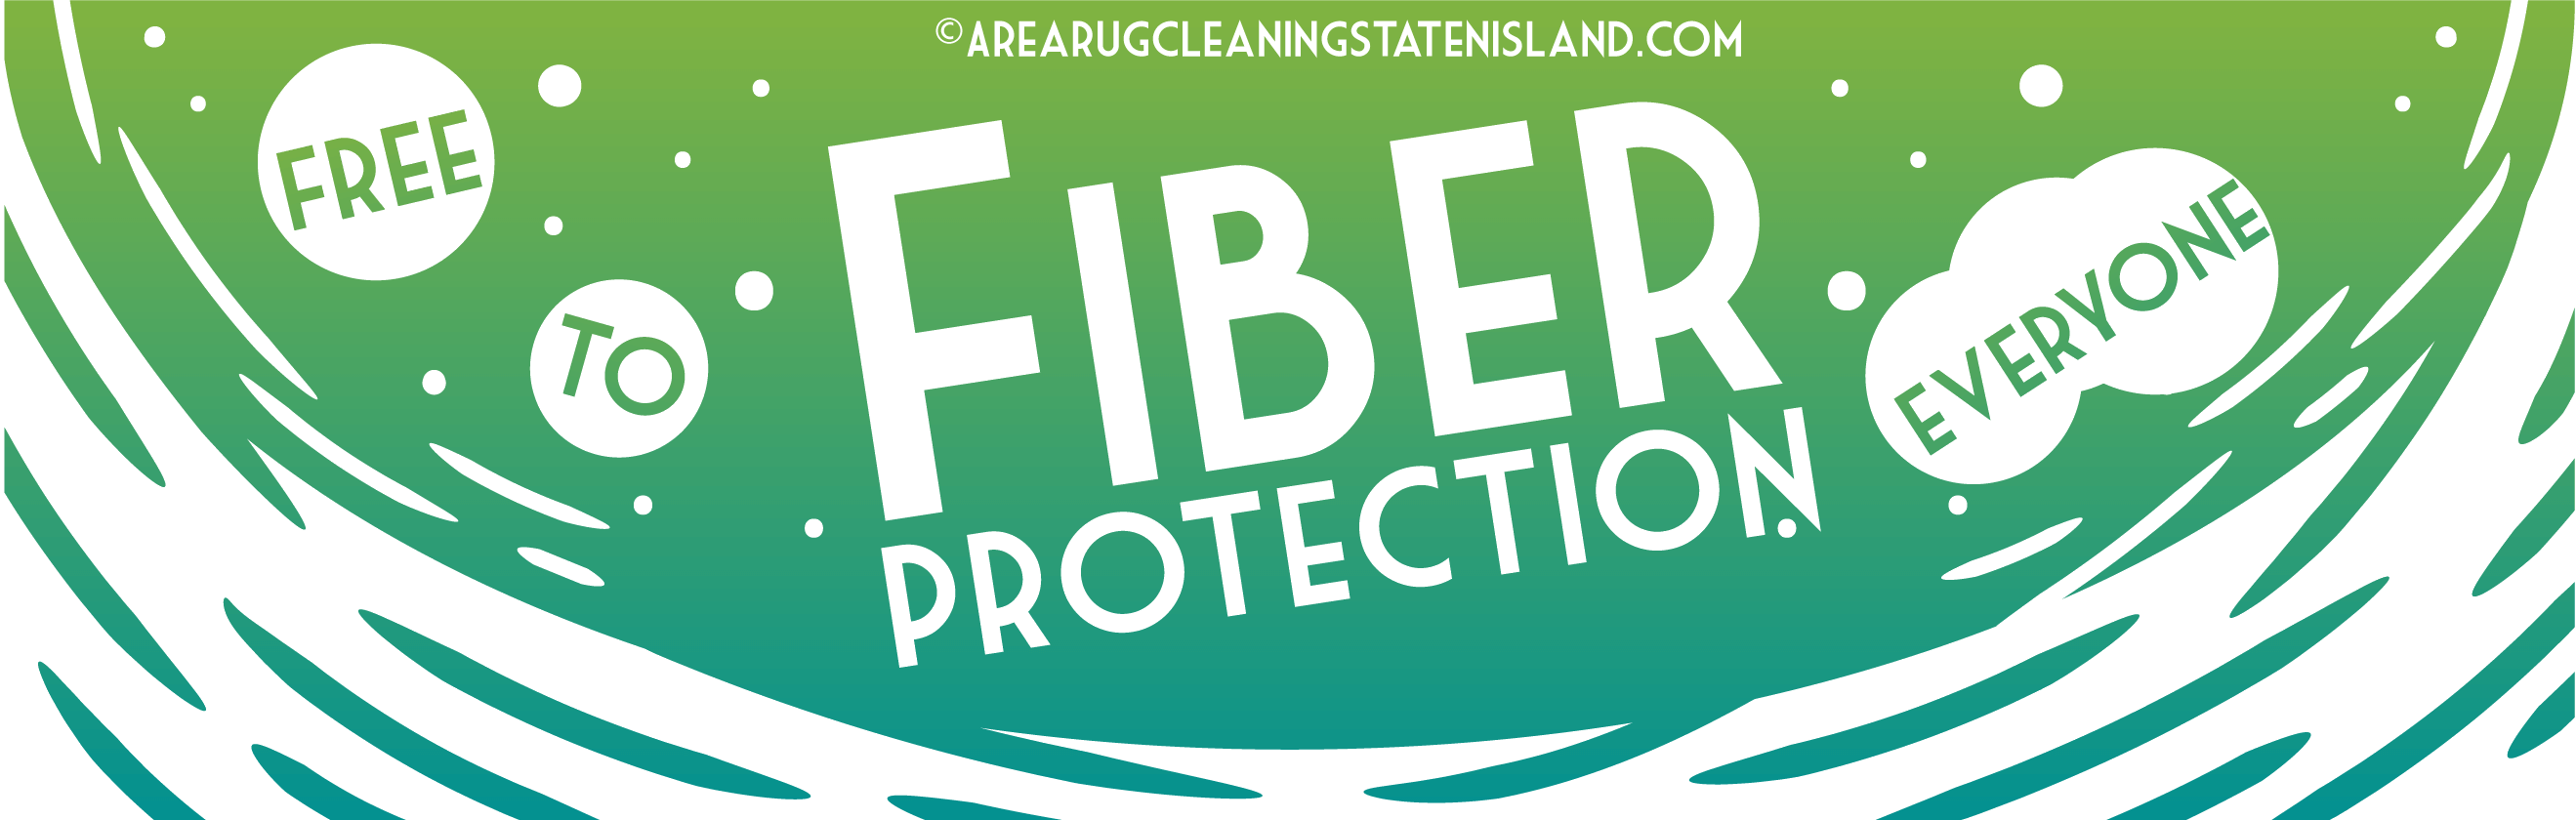 Free Fiber Protection for All Cleaning - Grant-city-10306